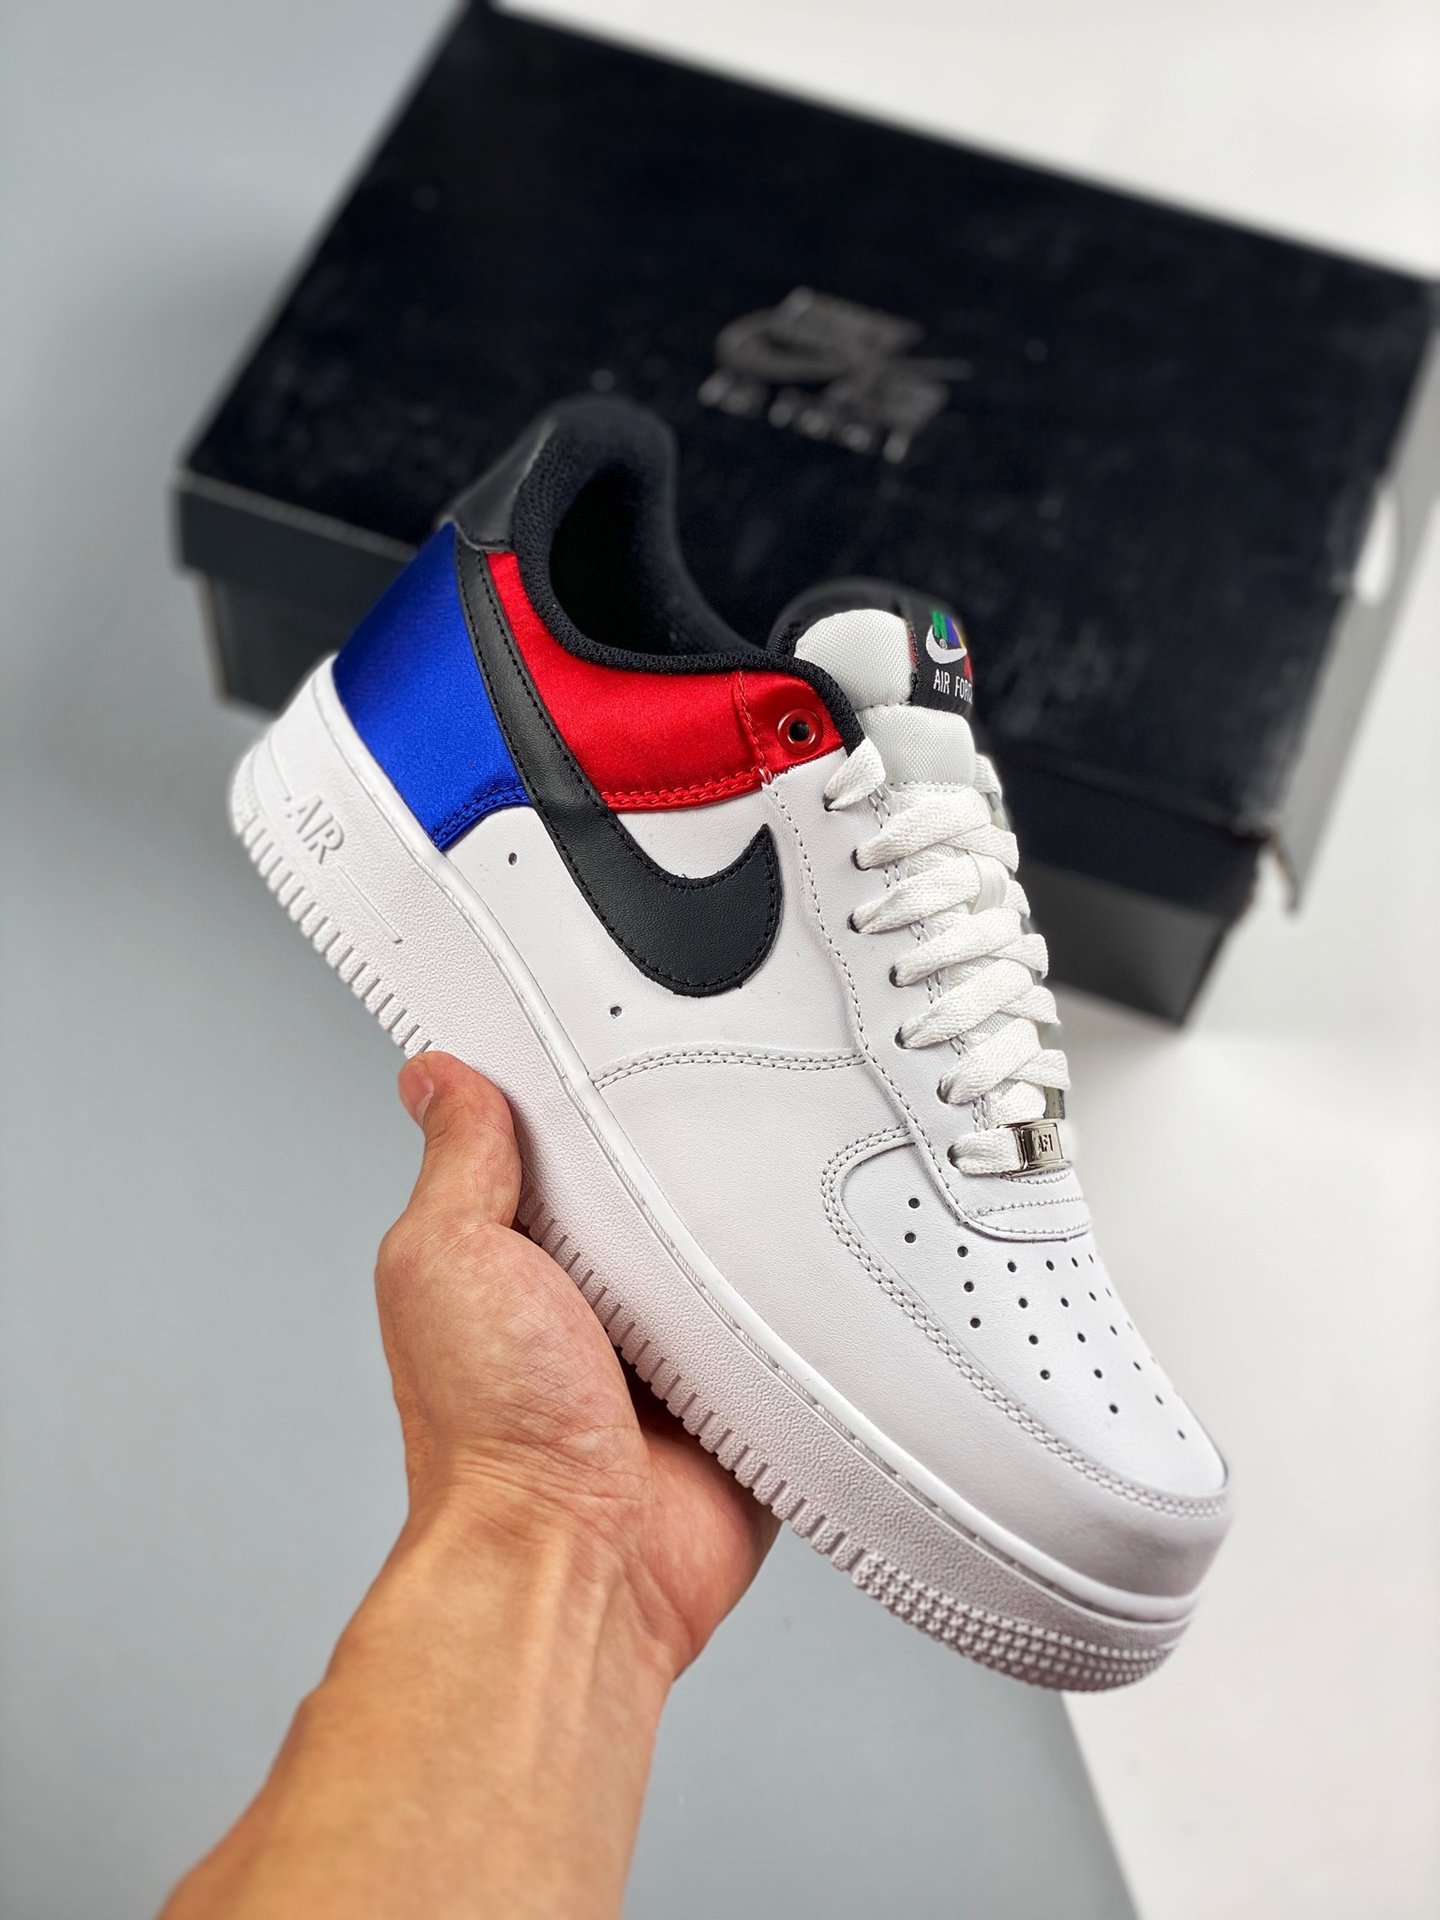 Nike Air AF Force 1 Low 'Unite' White/Multi-Color CW7010-100 Shoes